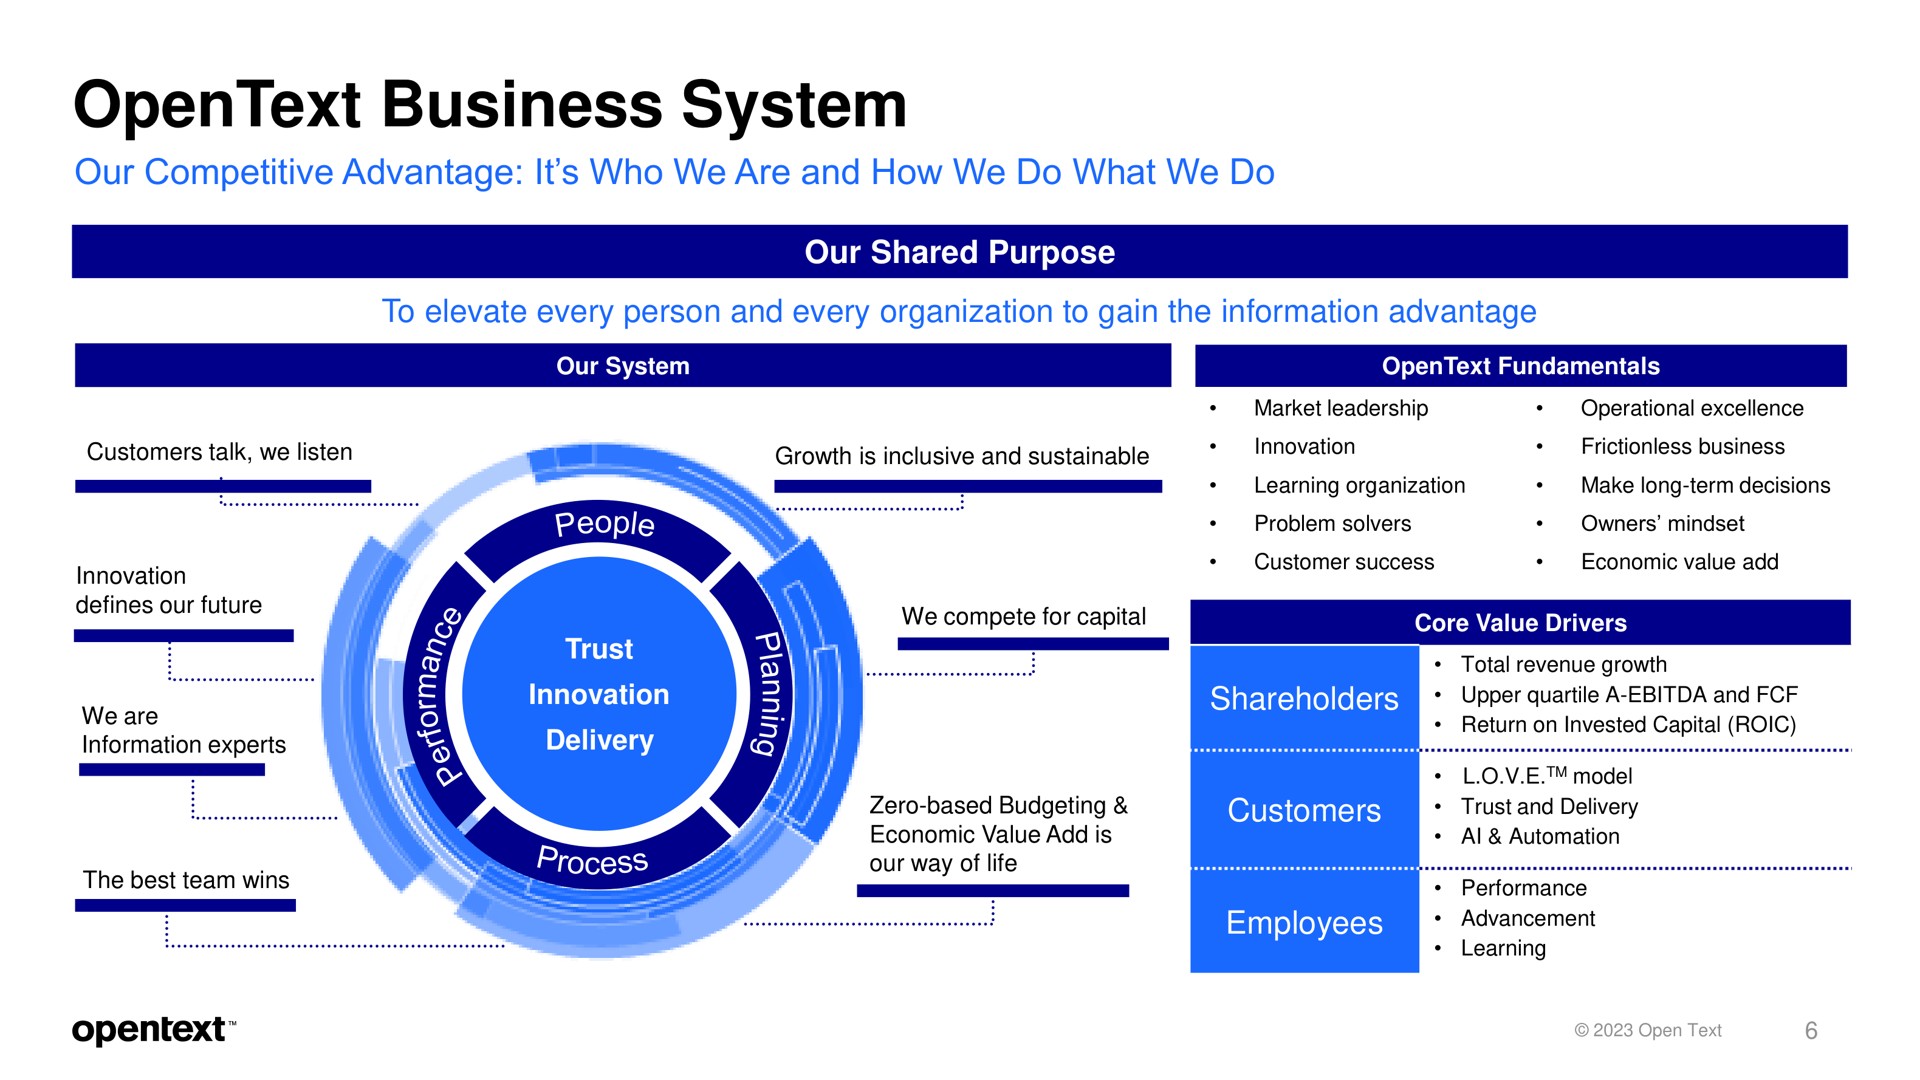 business system zer based budgeting tes | OpenText